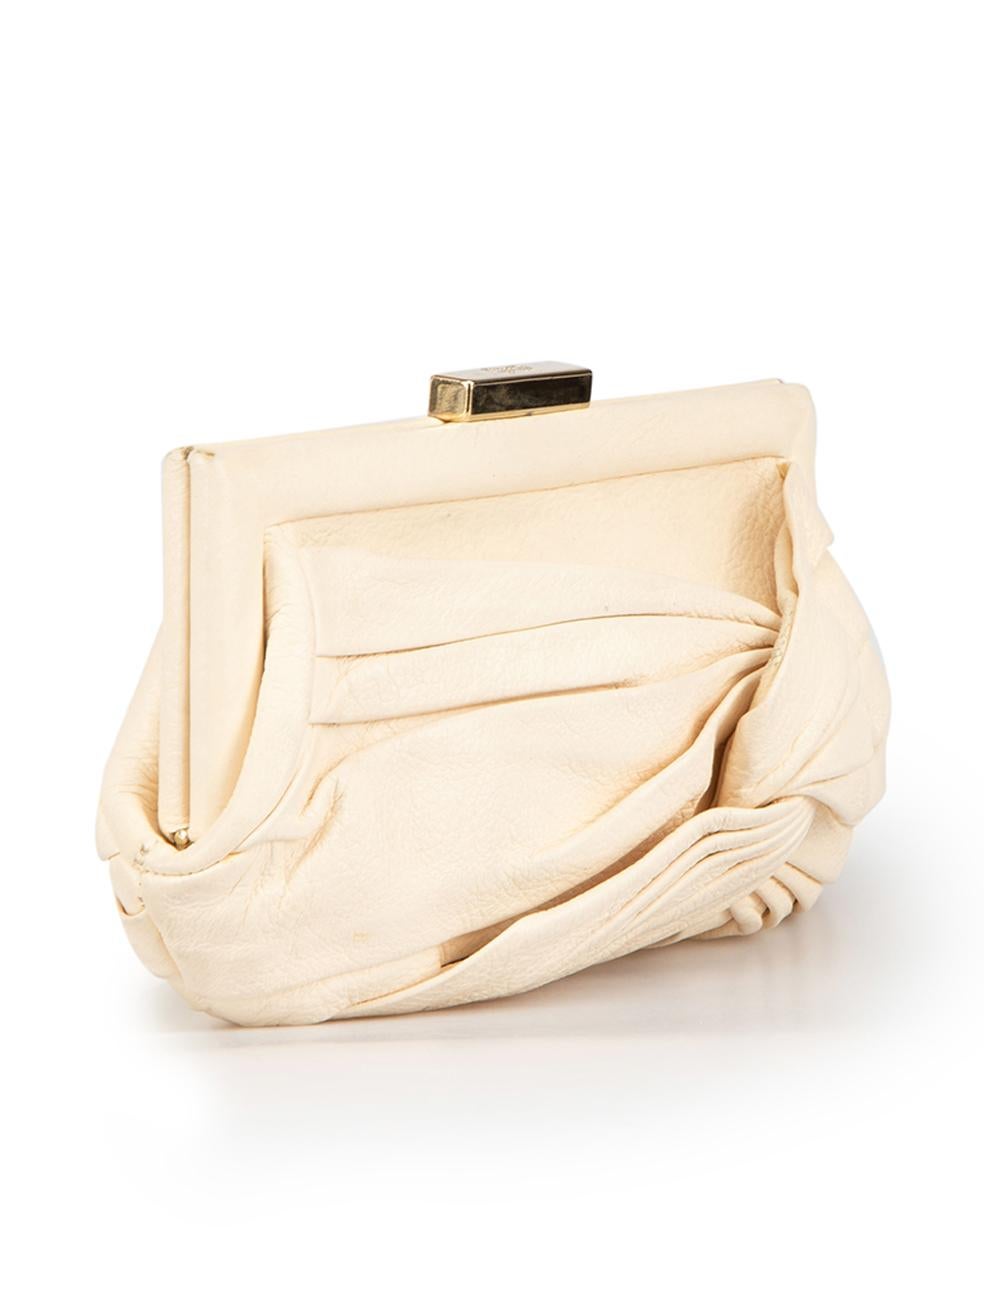 Women's Anya Hindmarch Cream Leather Knot Frame Clutch For Sale